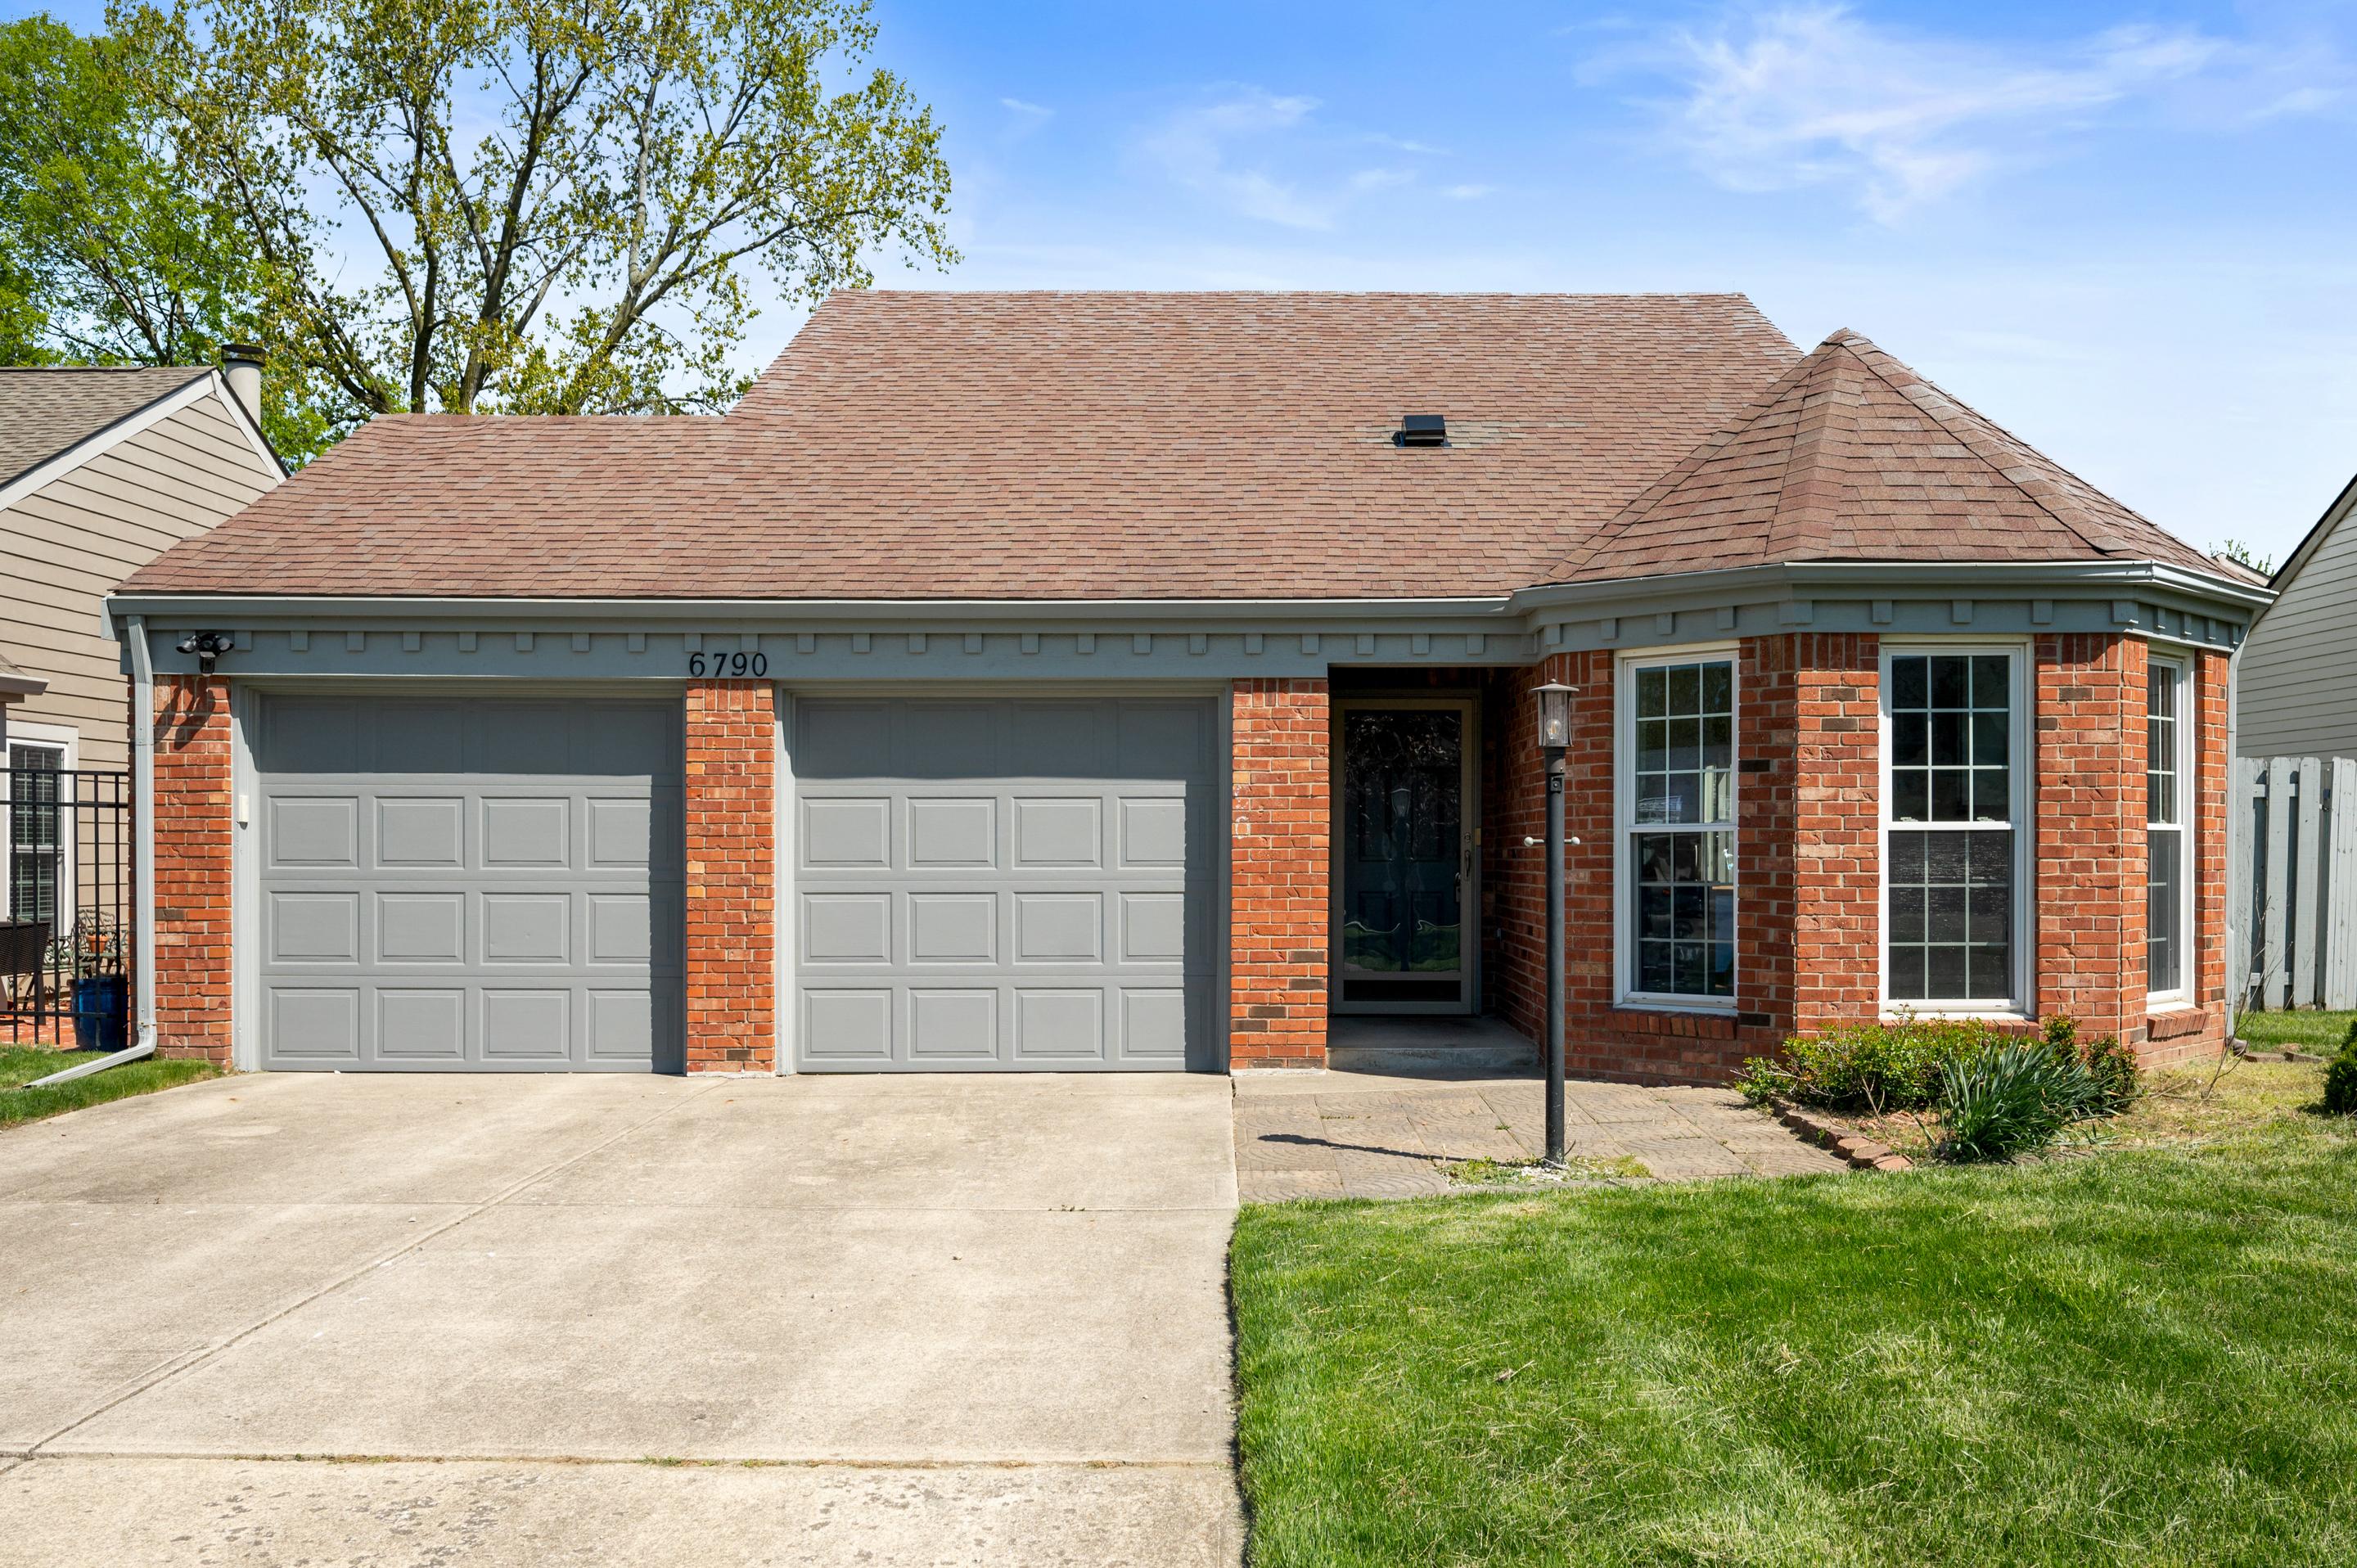 Photo one of 6790 Navigate Way Indianapolis IN 46250 | MLS 21975509